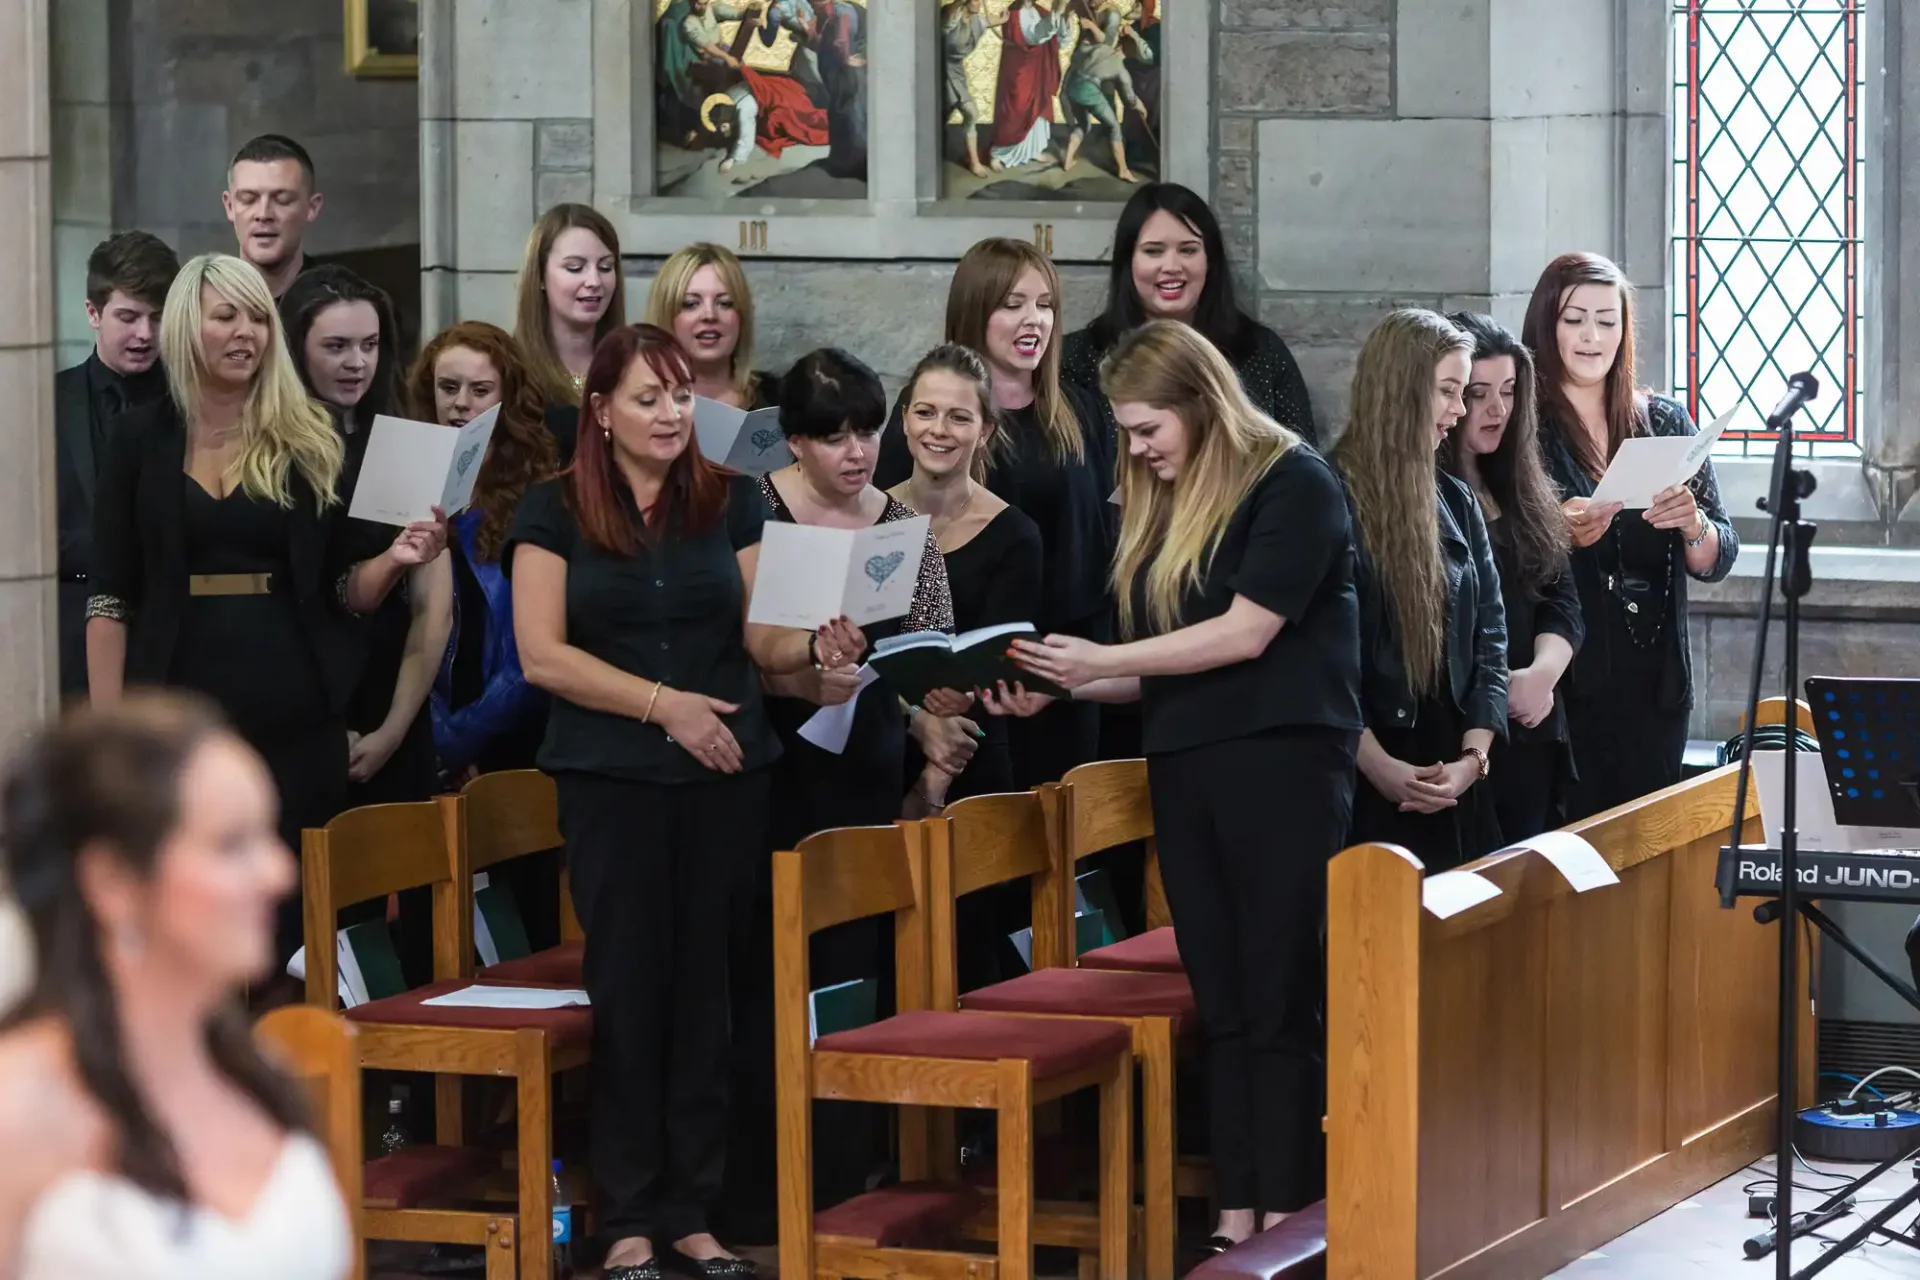 A choir of mixed young adults sings from sheet music inside a church, with attentive audience members seated nearby.